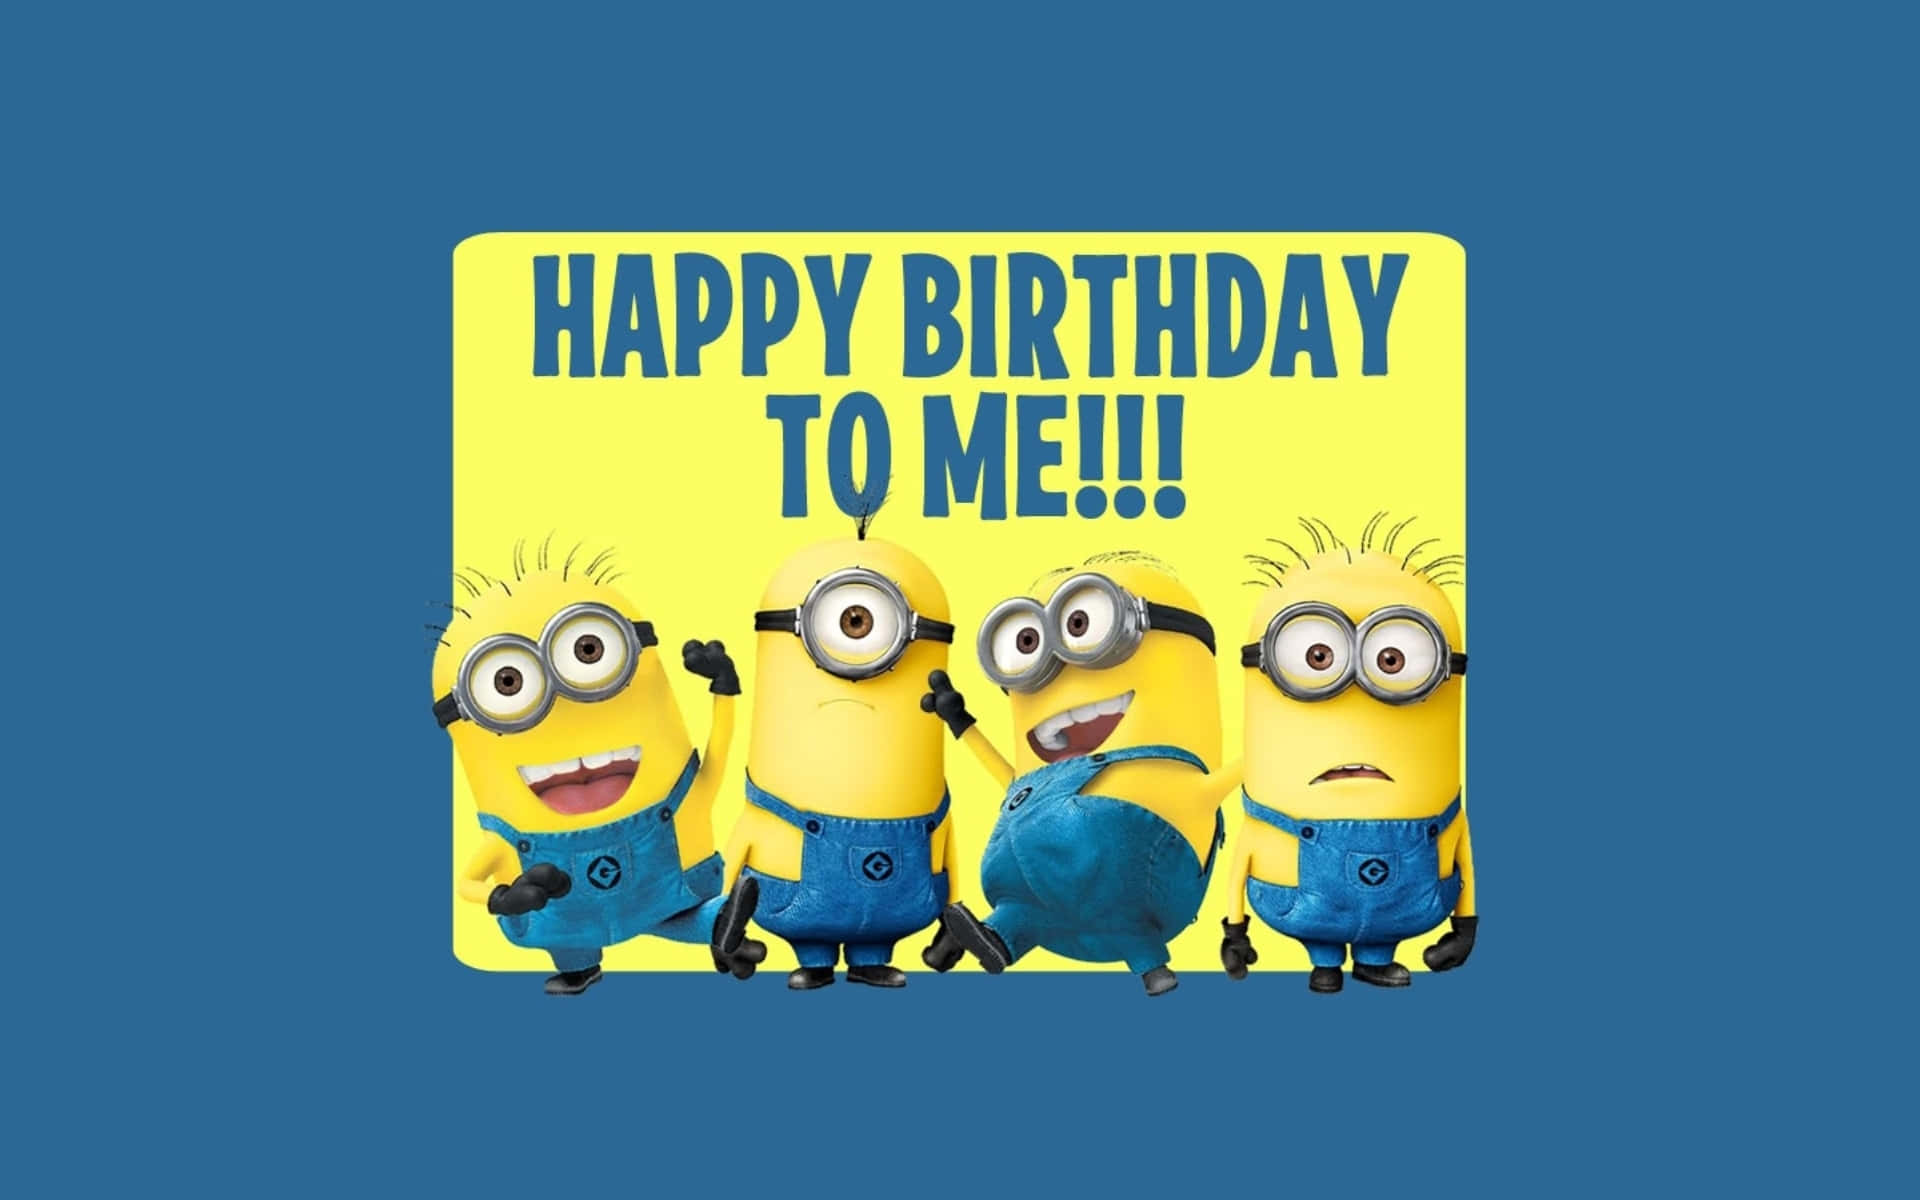 "It's minions birthday and the party just started!" Wallpaper